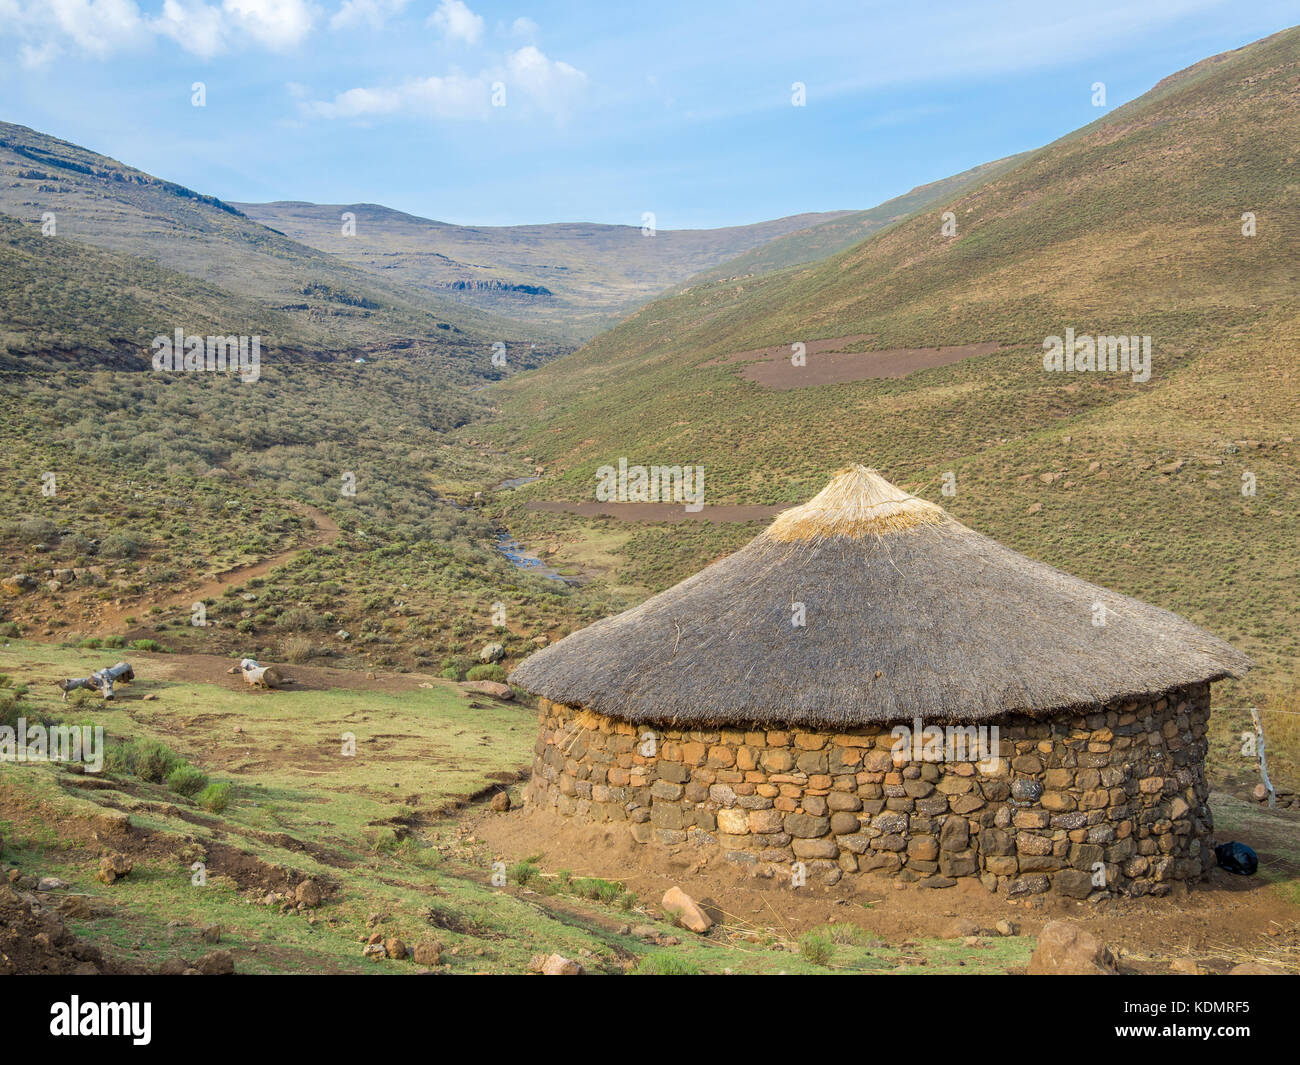 Traditional thatched stone round hut of the Basutho in the mountain highlands of Lesotho, Southern Africa Stock Photo